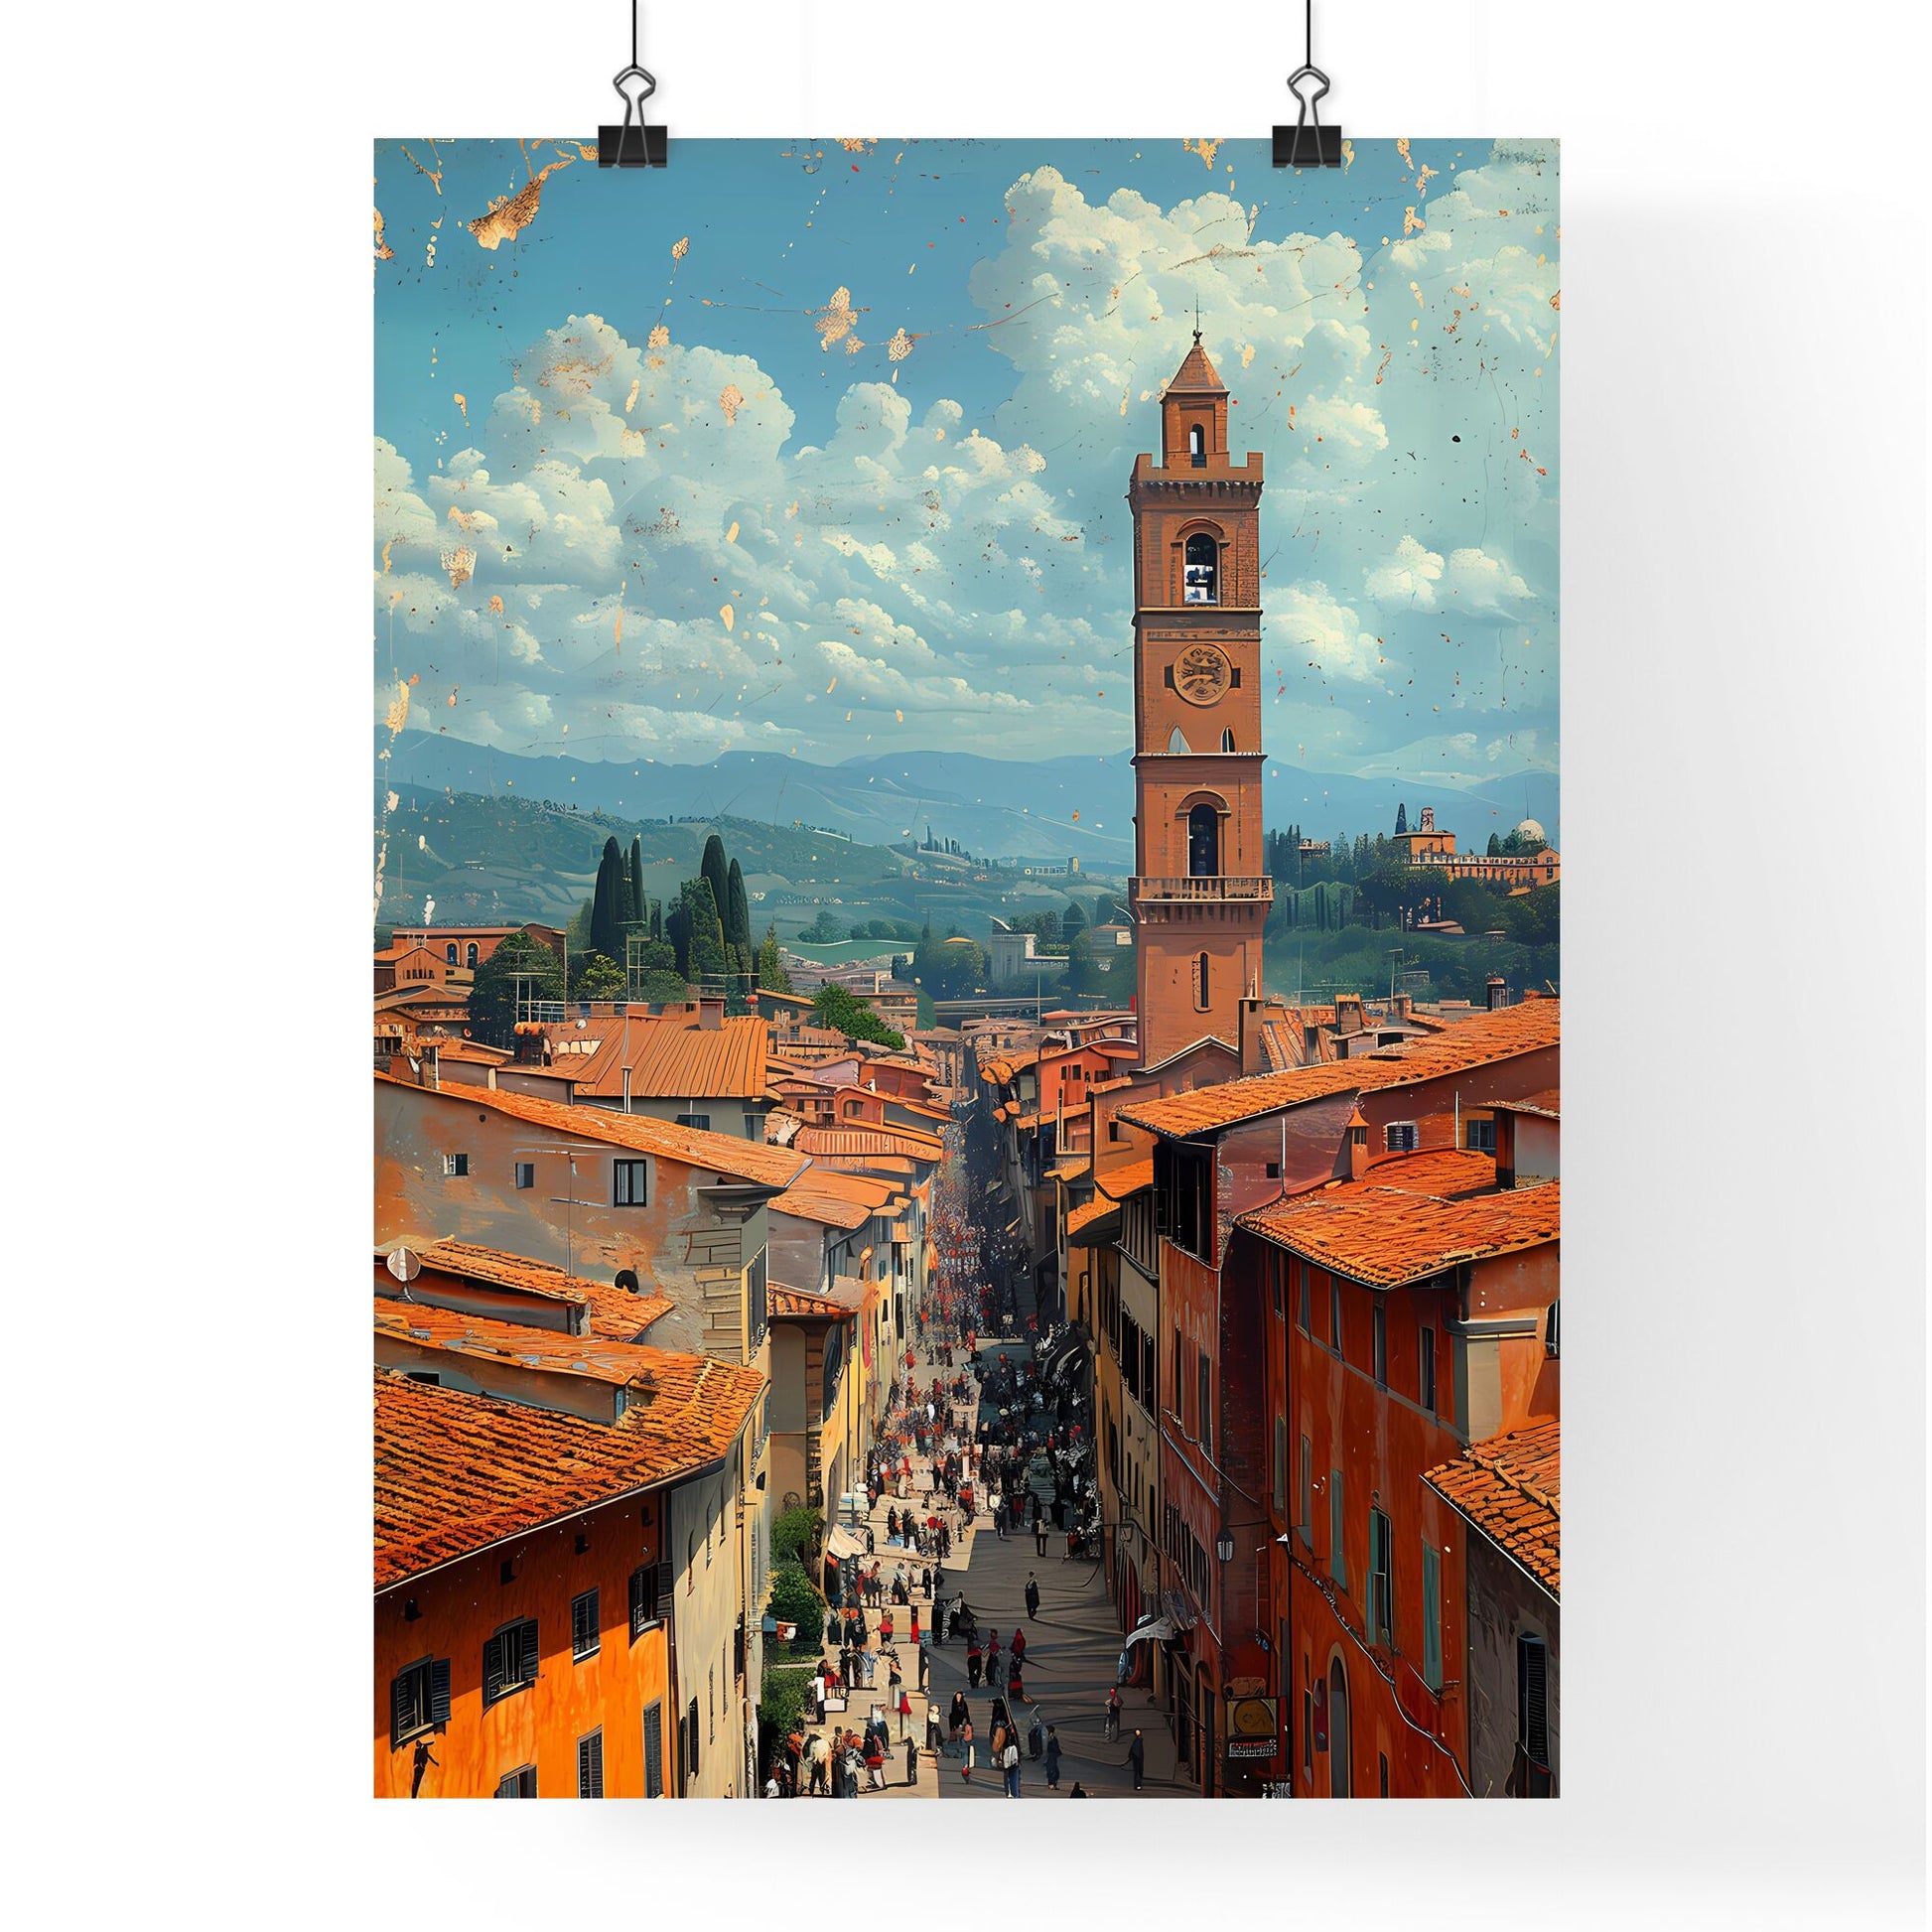 14th Century Italian Florence Street Scene Depicting Bustling Market Activity and Tower Default Title